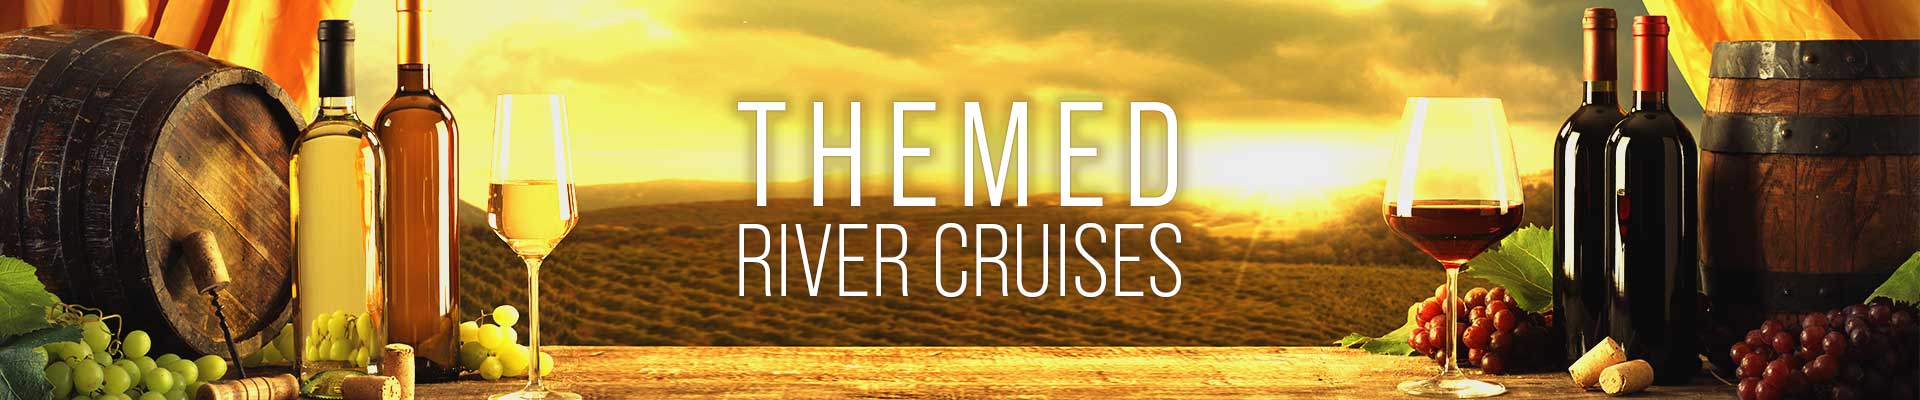 Themed River Cruises